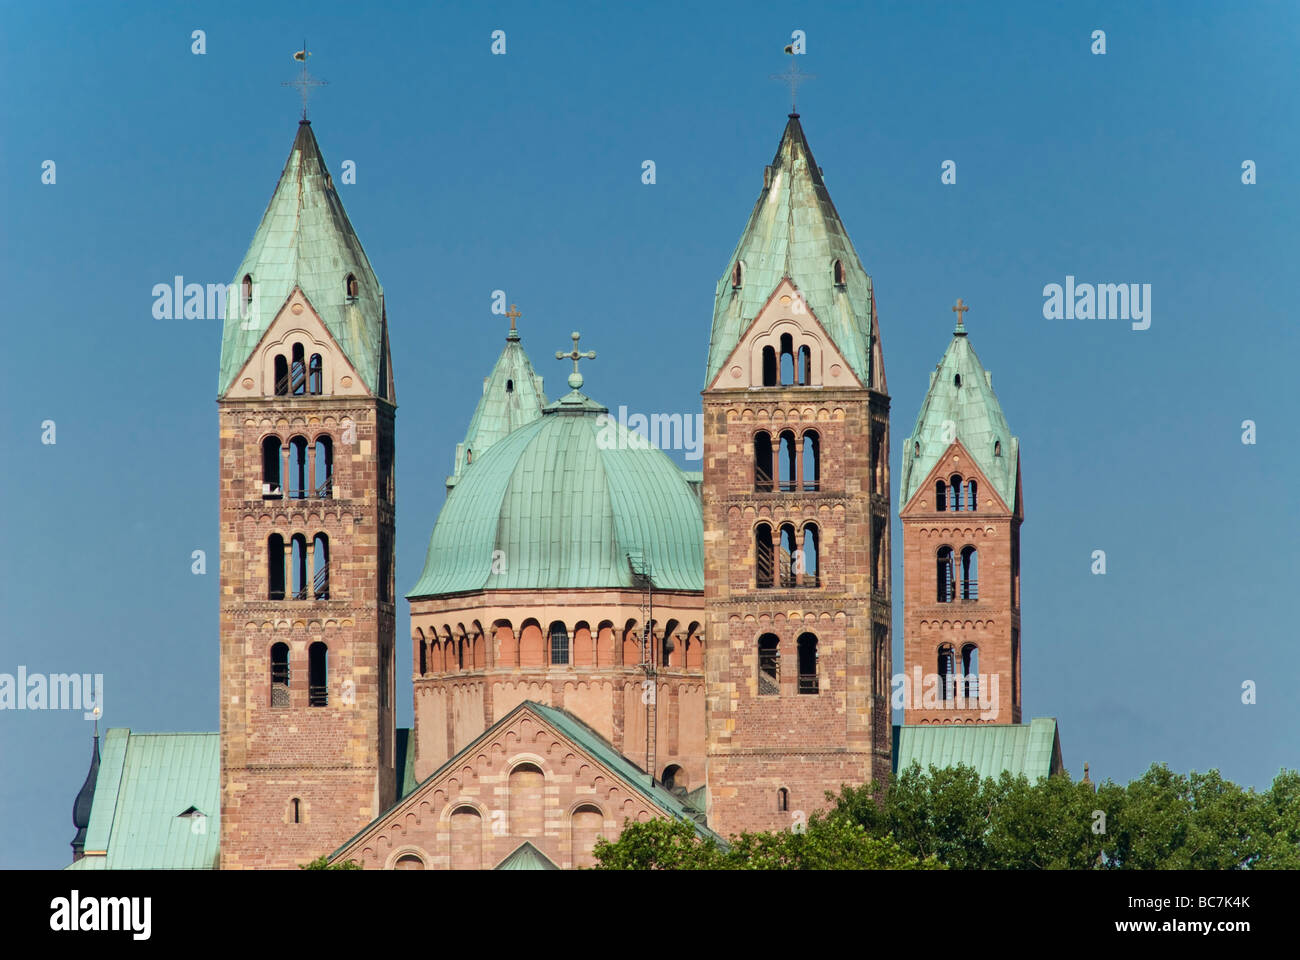 The famous romanic Dome of Speyer Palatinate Germany Stock Photo